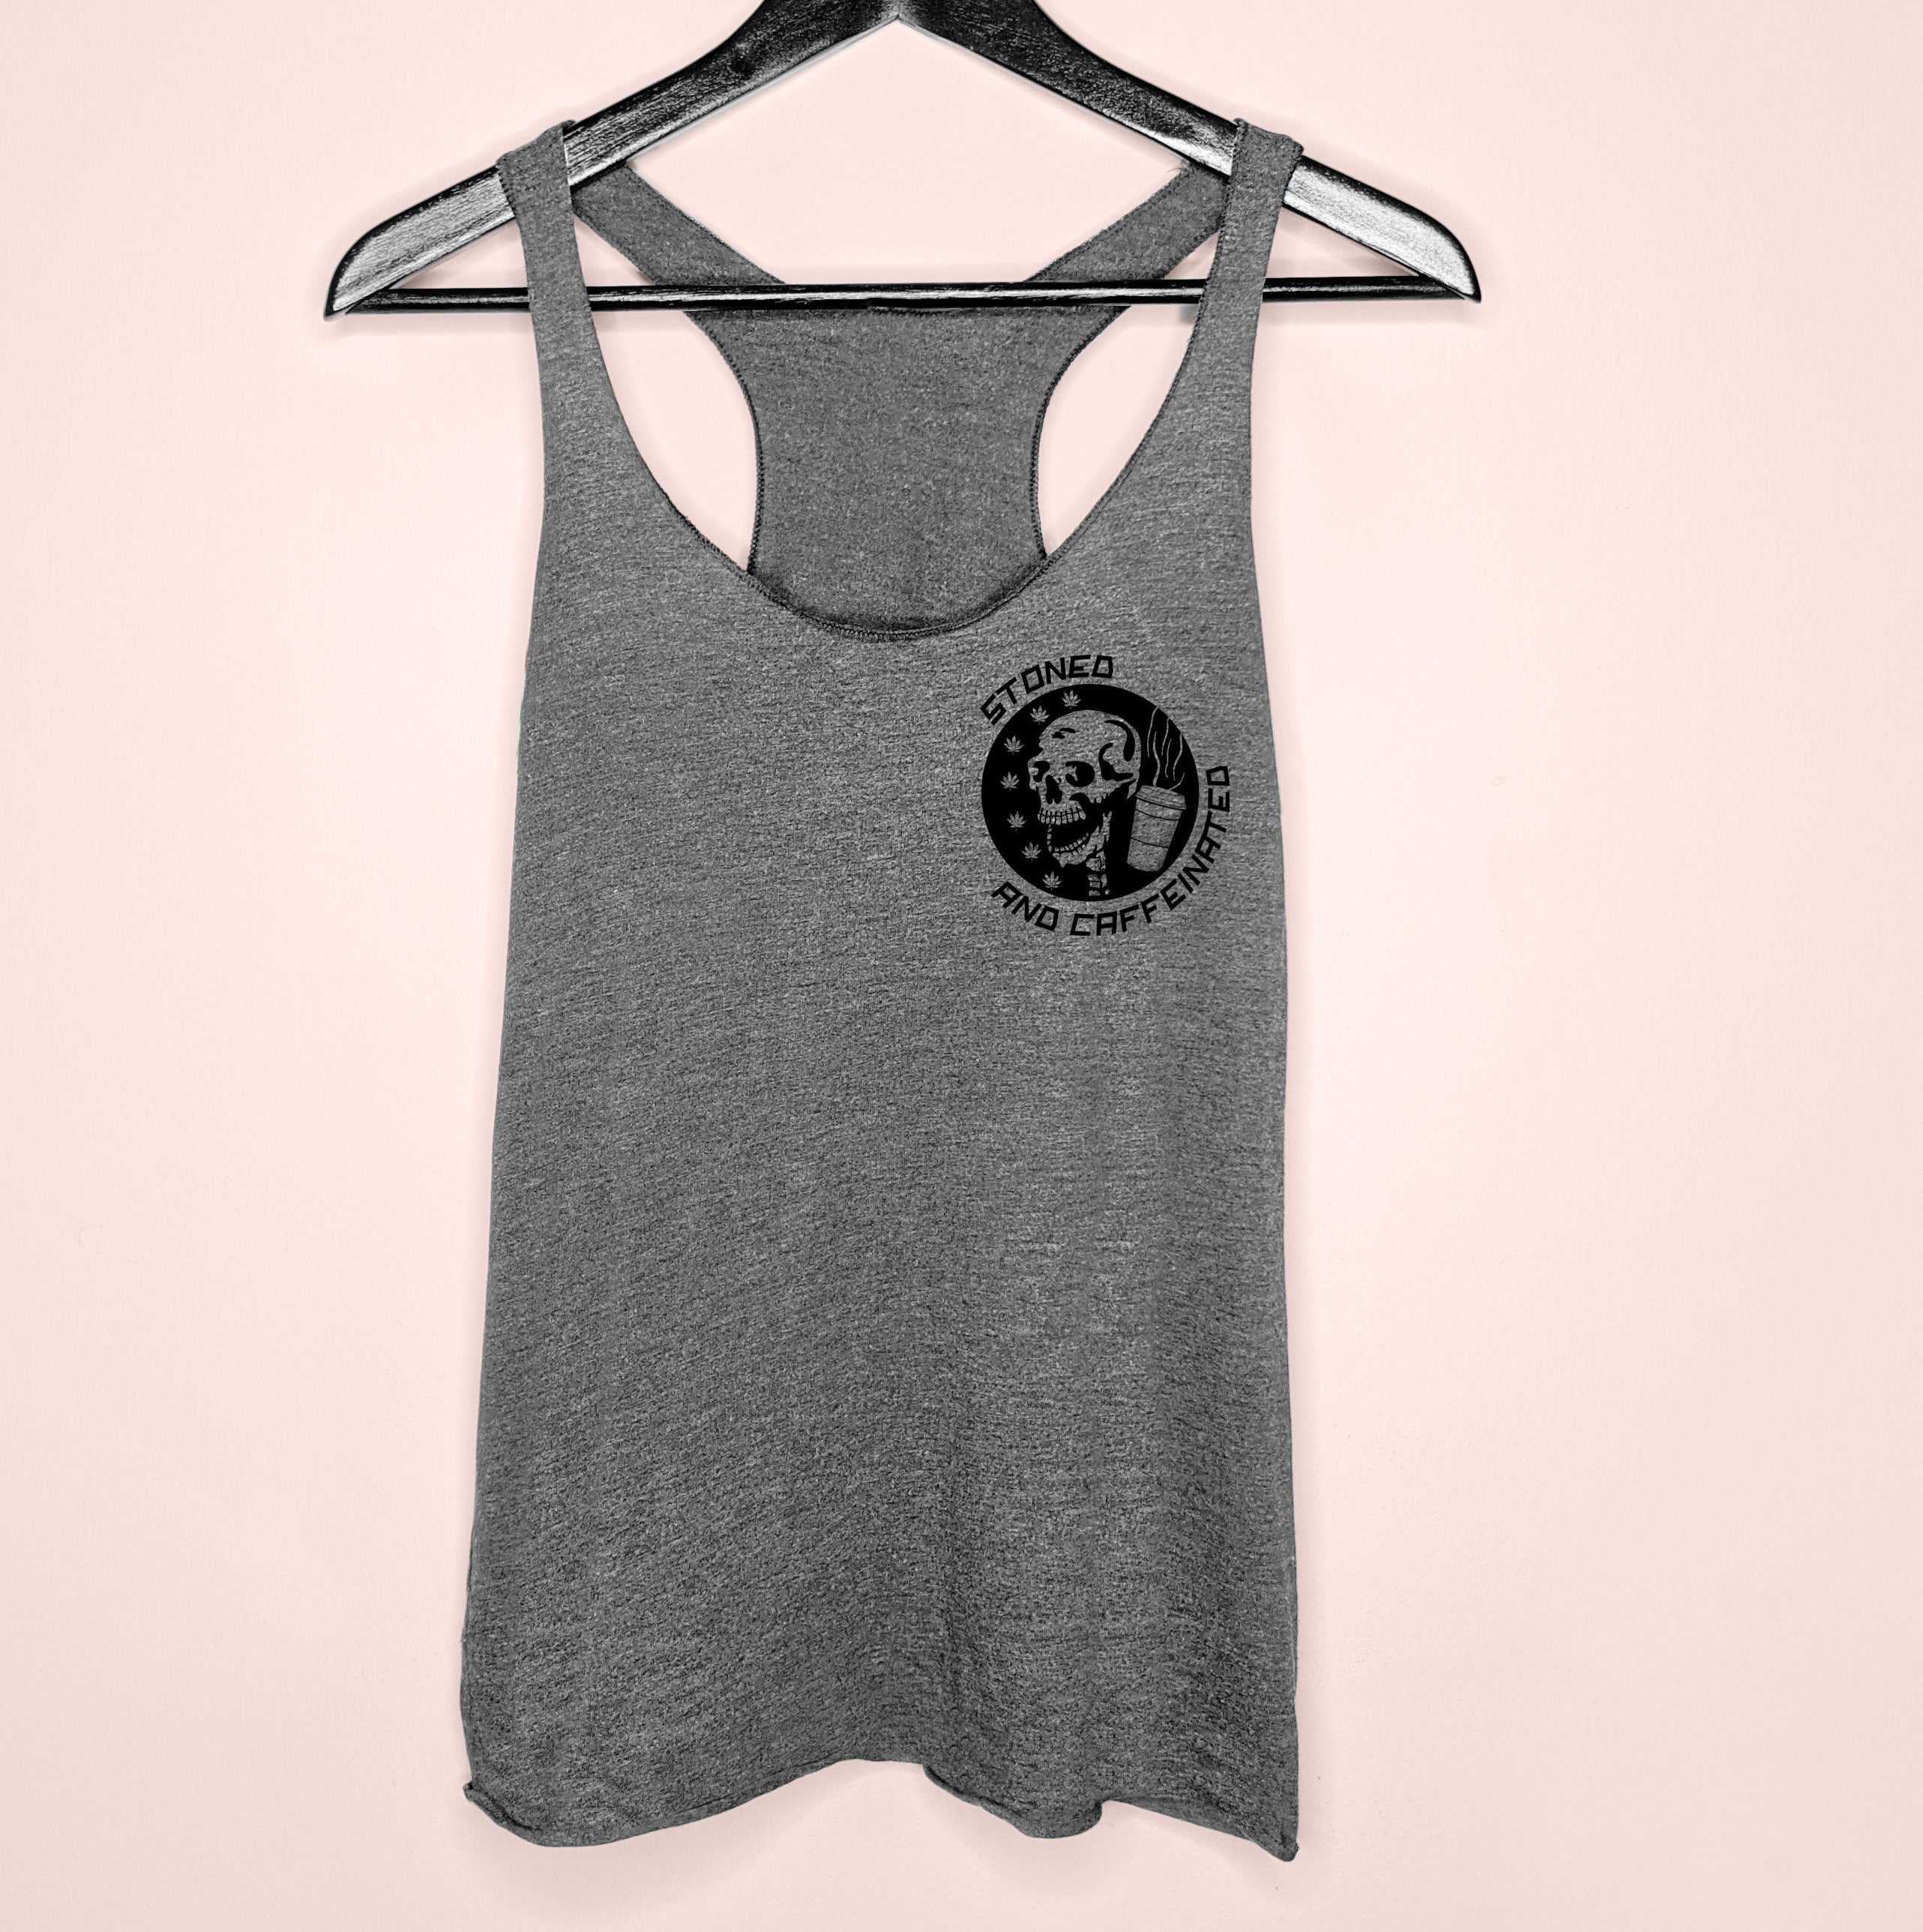 Grey tank top with a skeleton and a coffee saying stoned and caffeinated - HighCiti